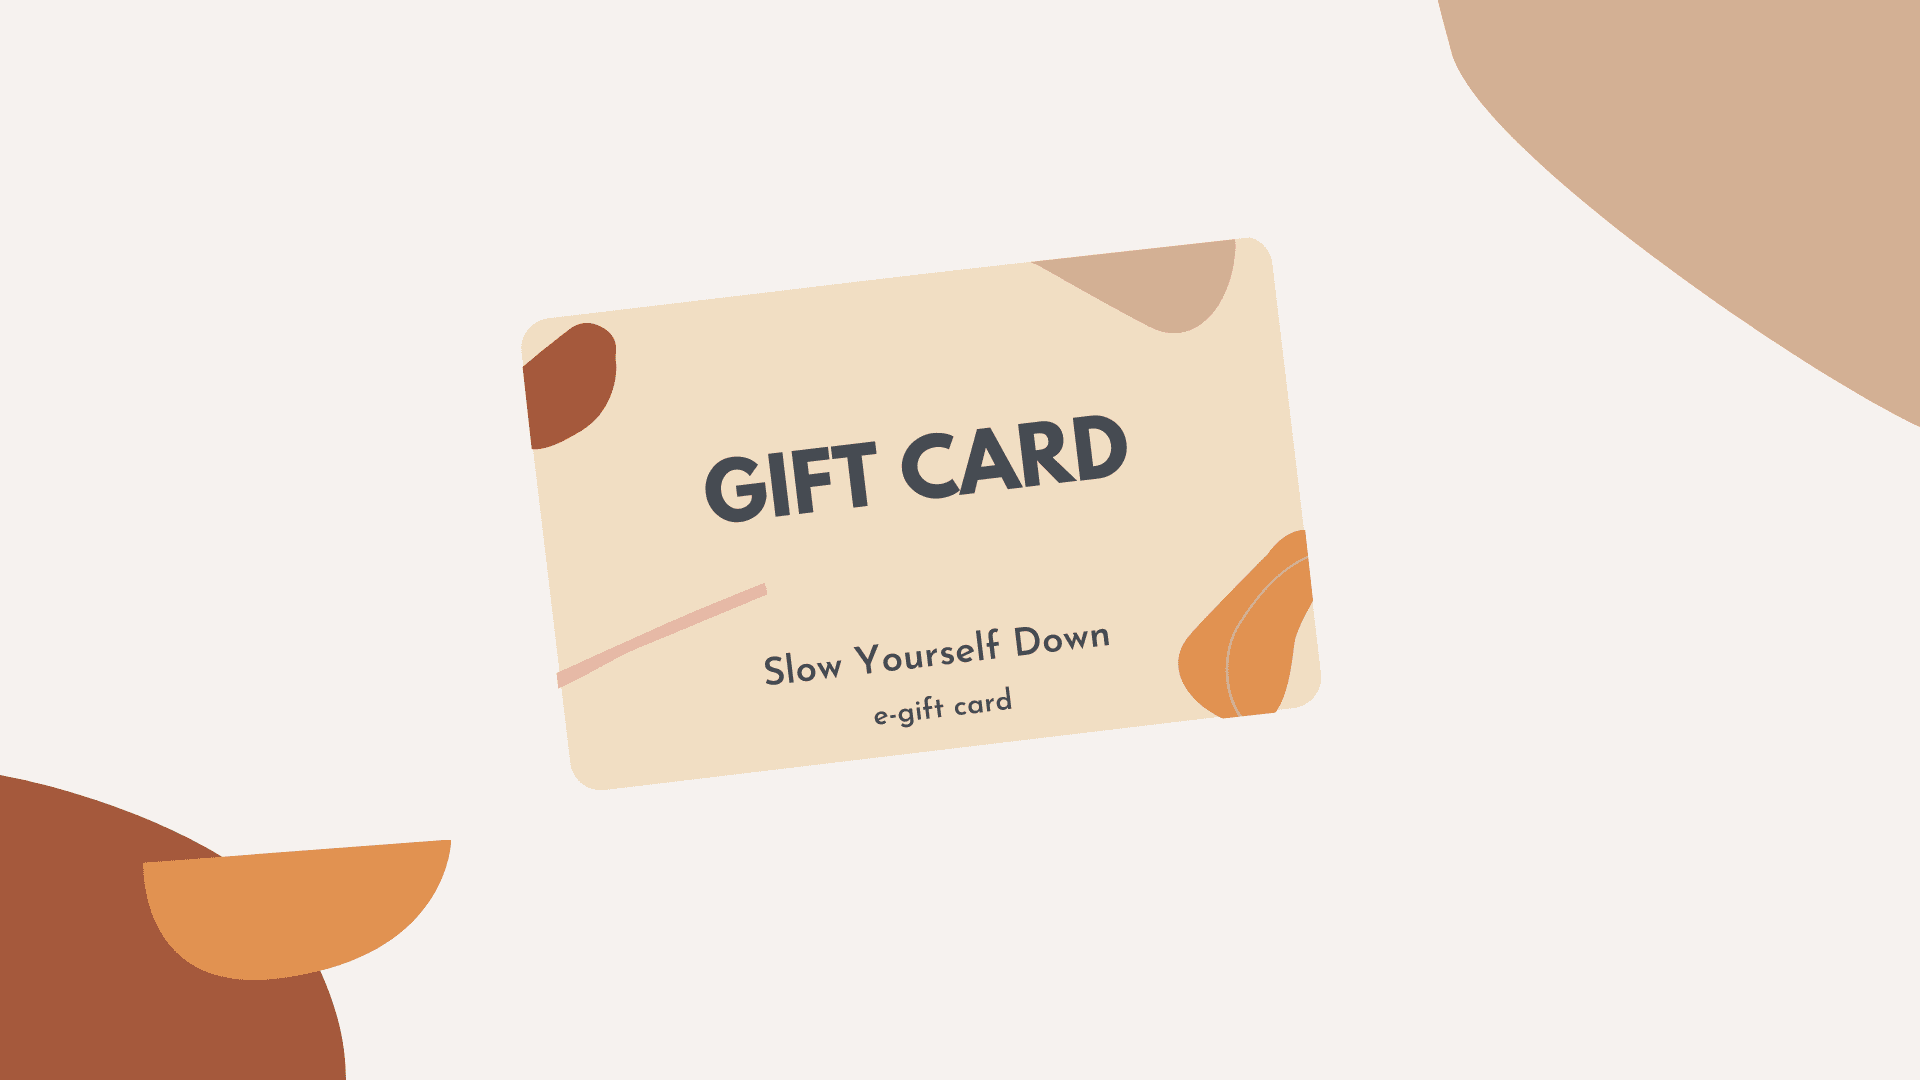 Gift Card Gift Card - Slow Yourself Down